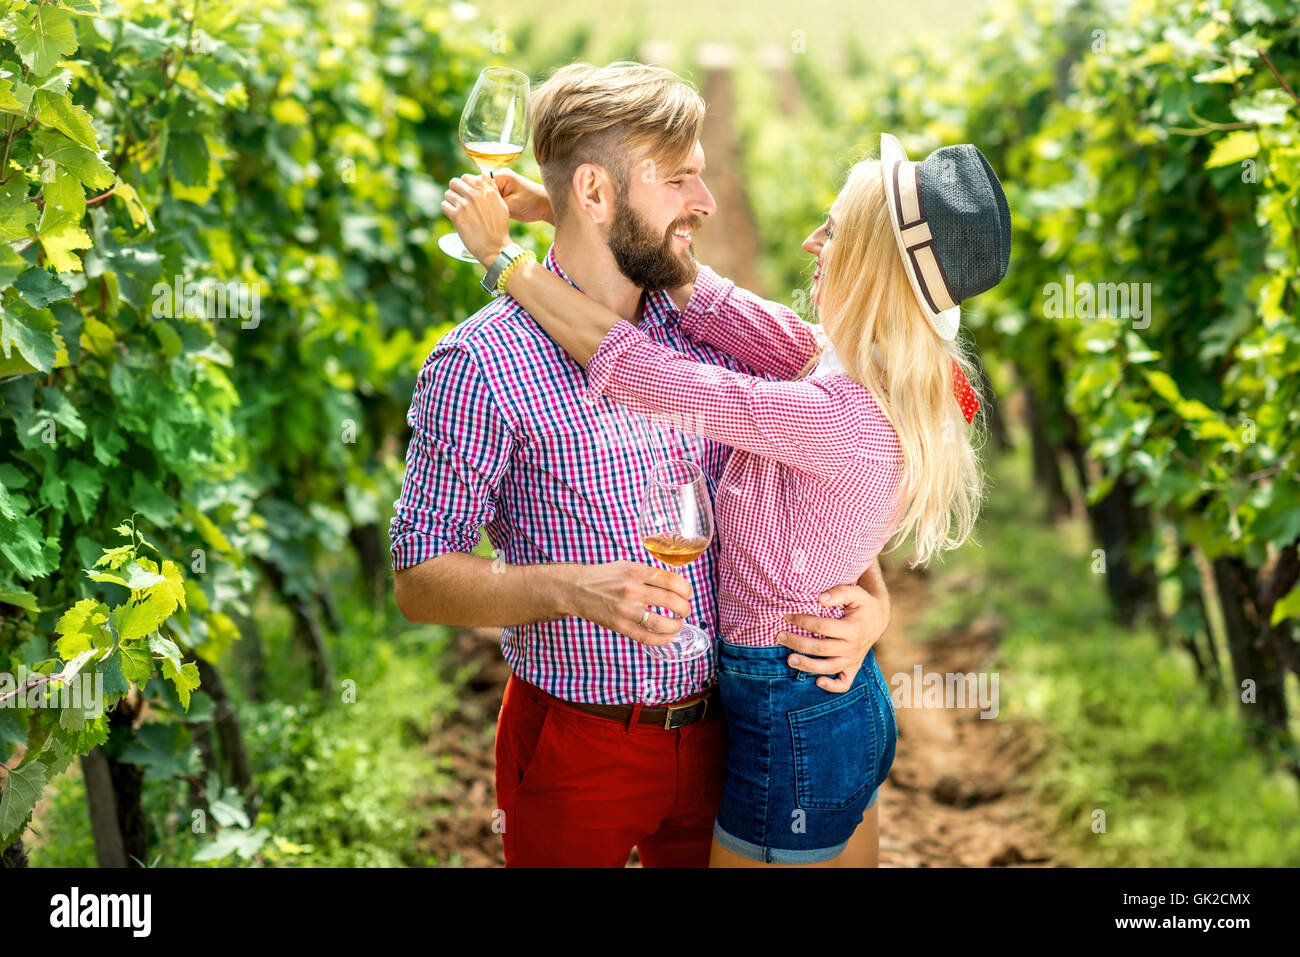 Couple having fun with glasses of wine on the vineyard Stock Photo